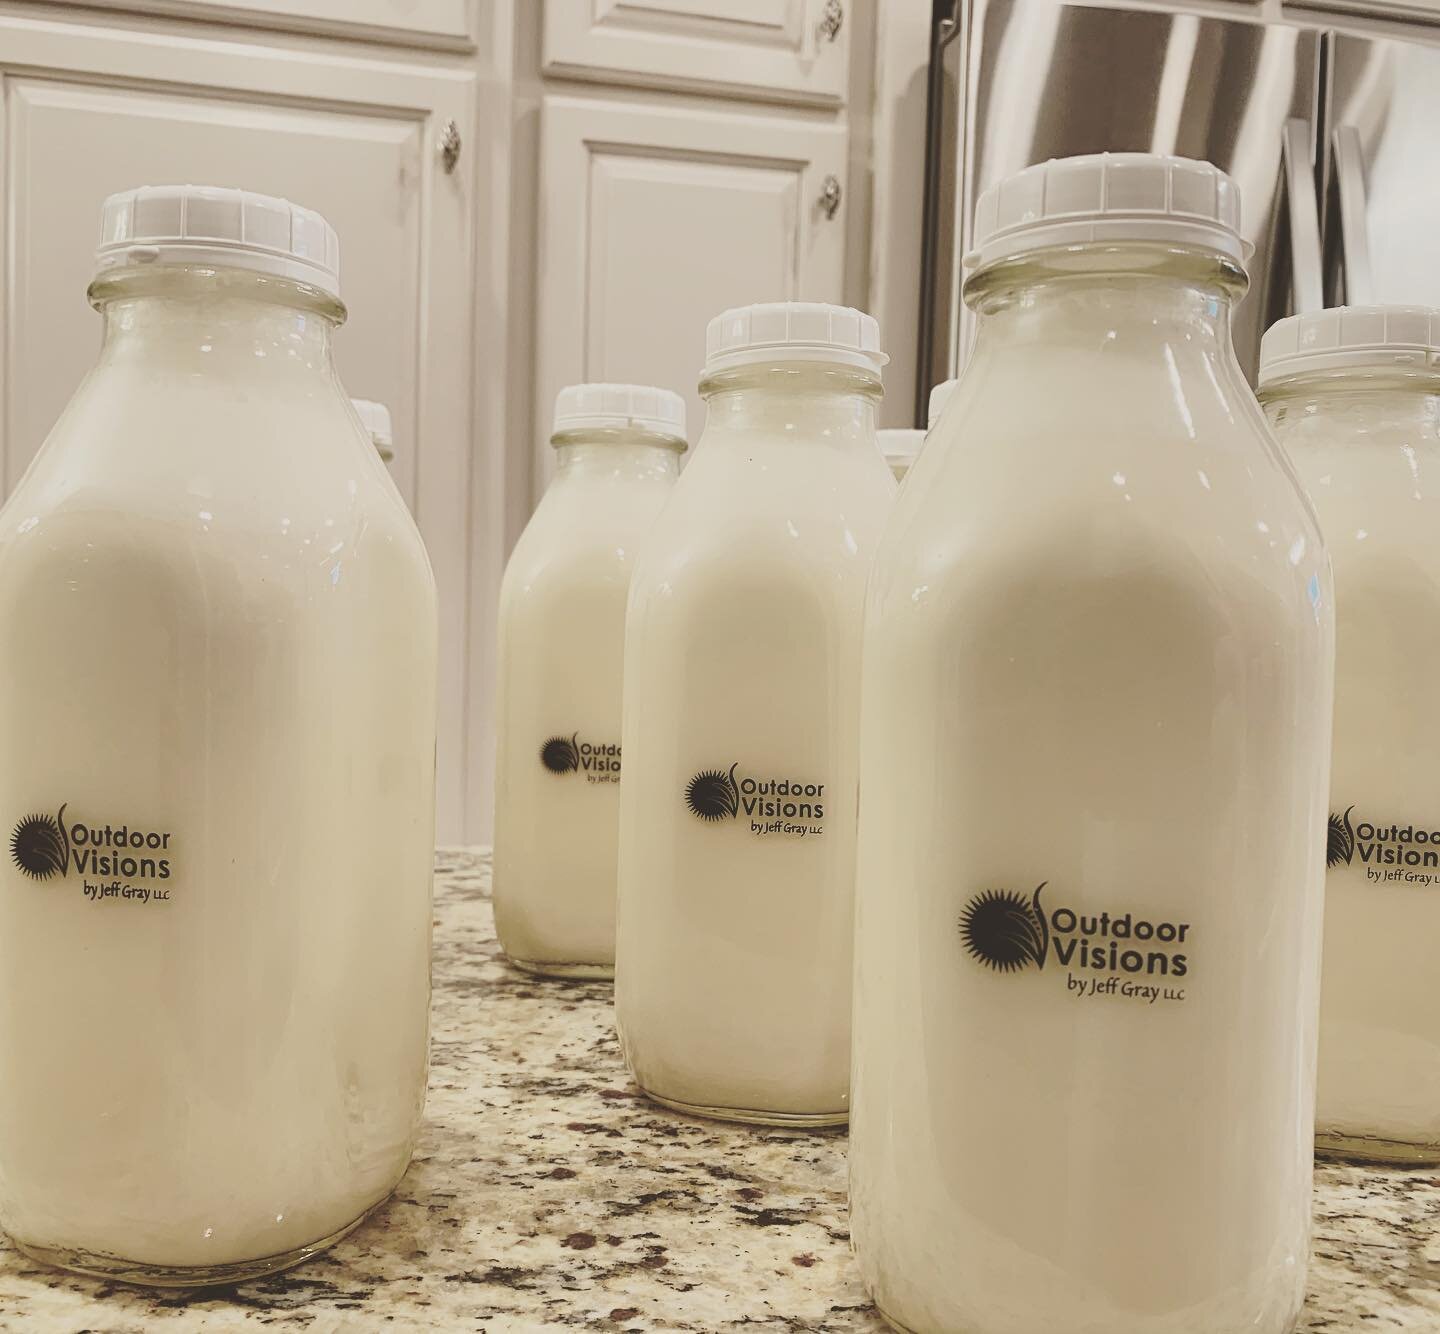 Fresh homemade egg nog heading out to some clients today. Thankful for another great year and we hope everyone has a Merry Christmas and a Happy New Year!